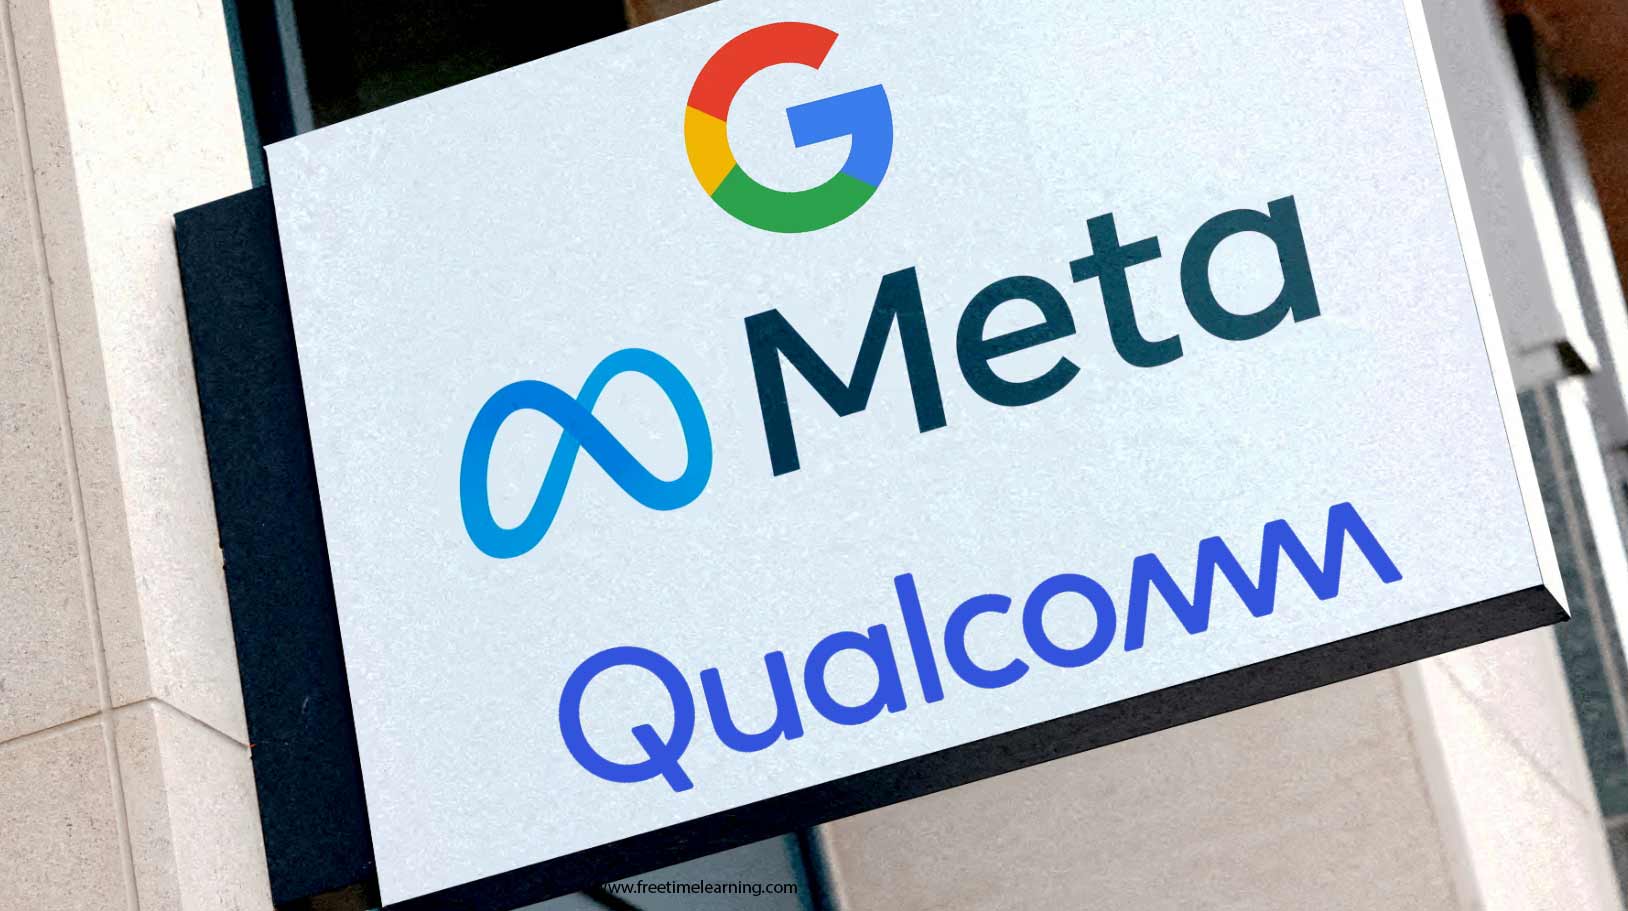 Google, Meta, Qualcomm team up to push for open digital ecosystems